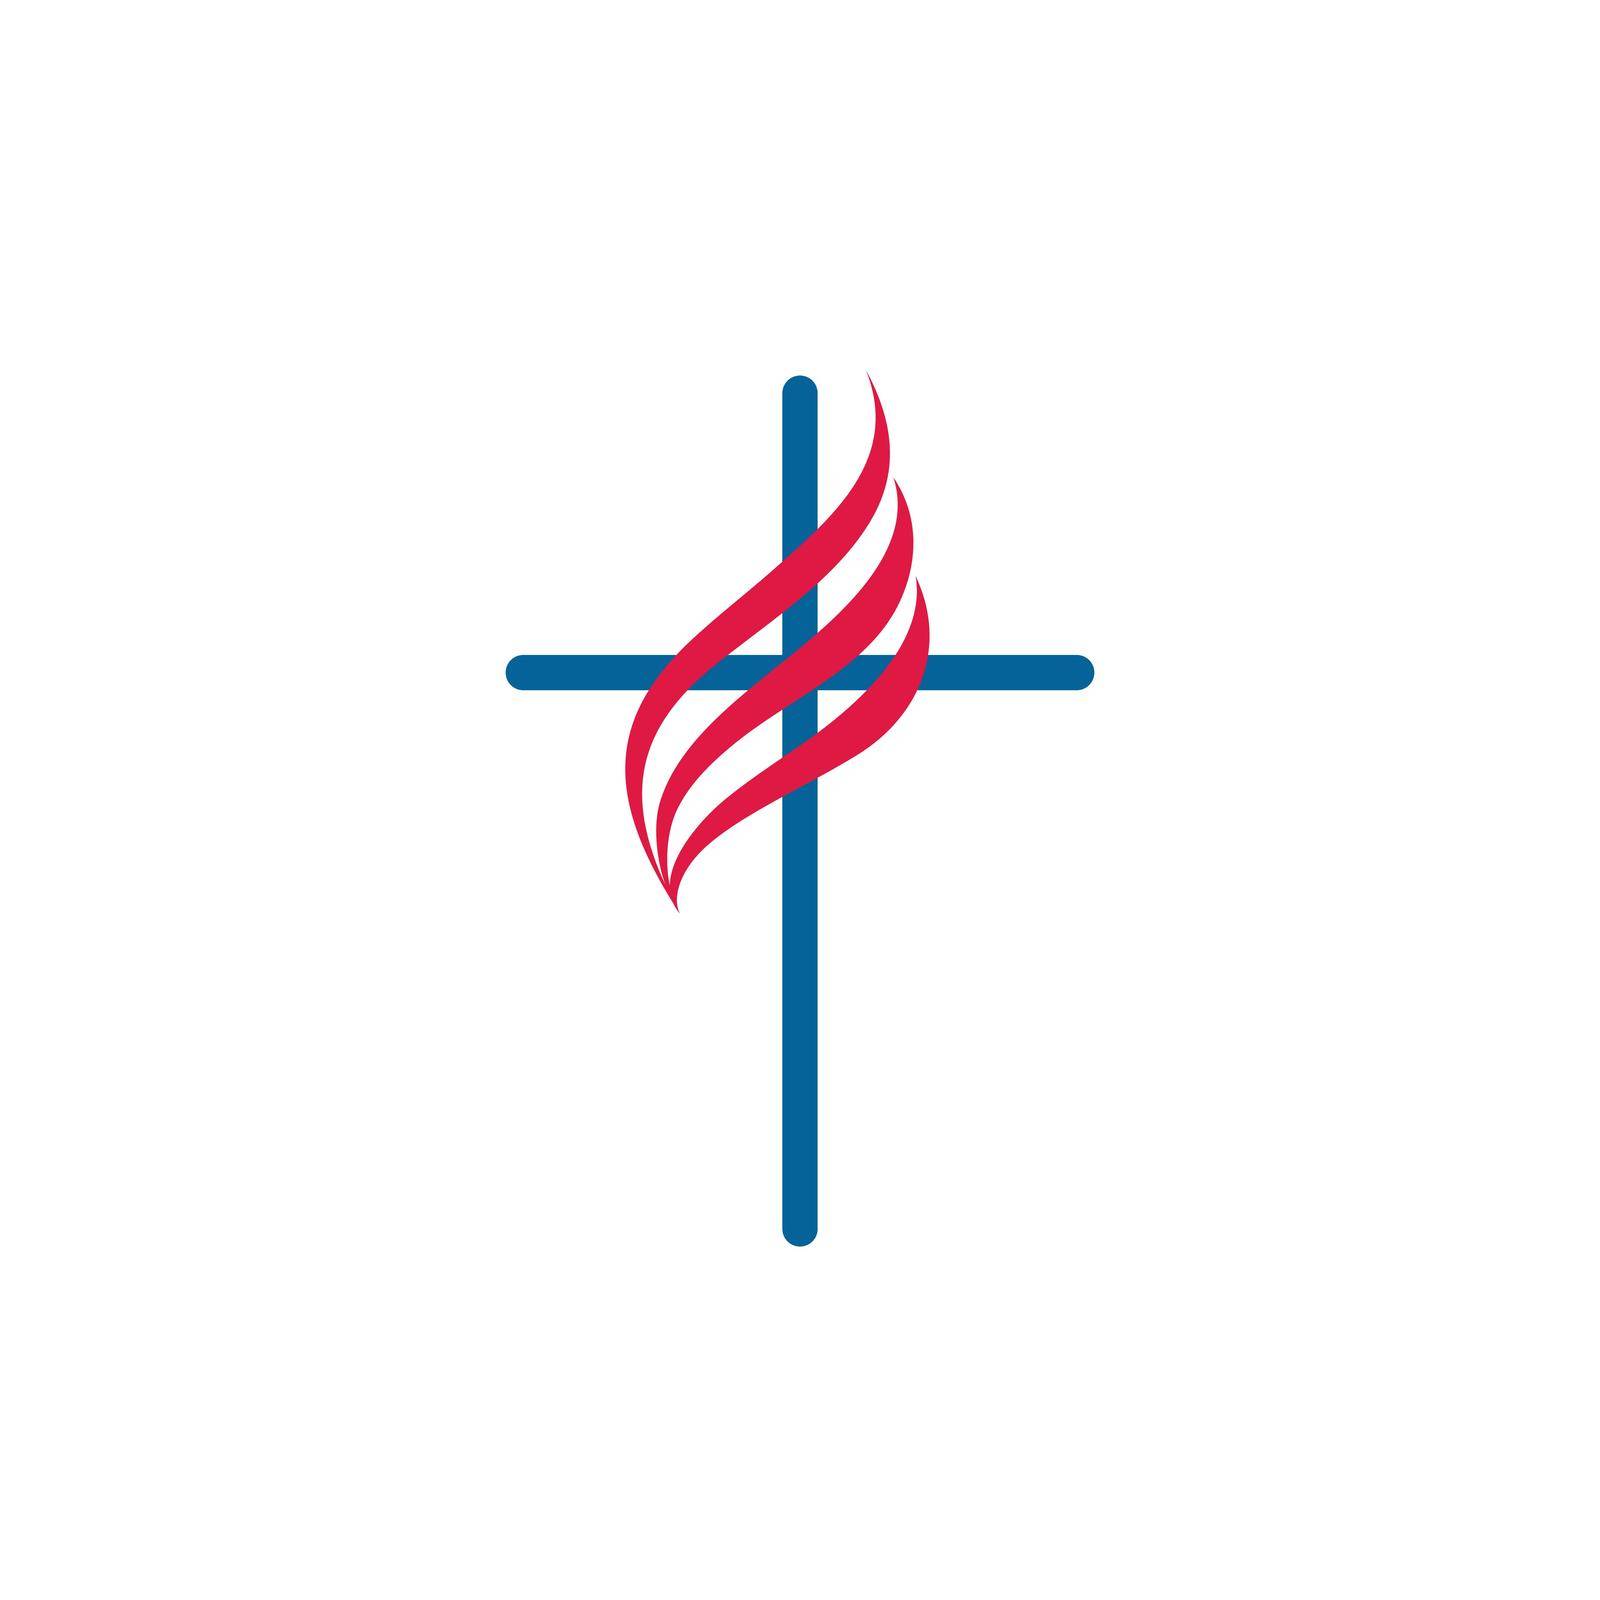 Cross with fire christian church logo. Vector icon for christian organizations. Isolated abstract graphic design template.